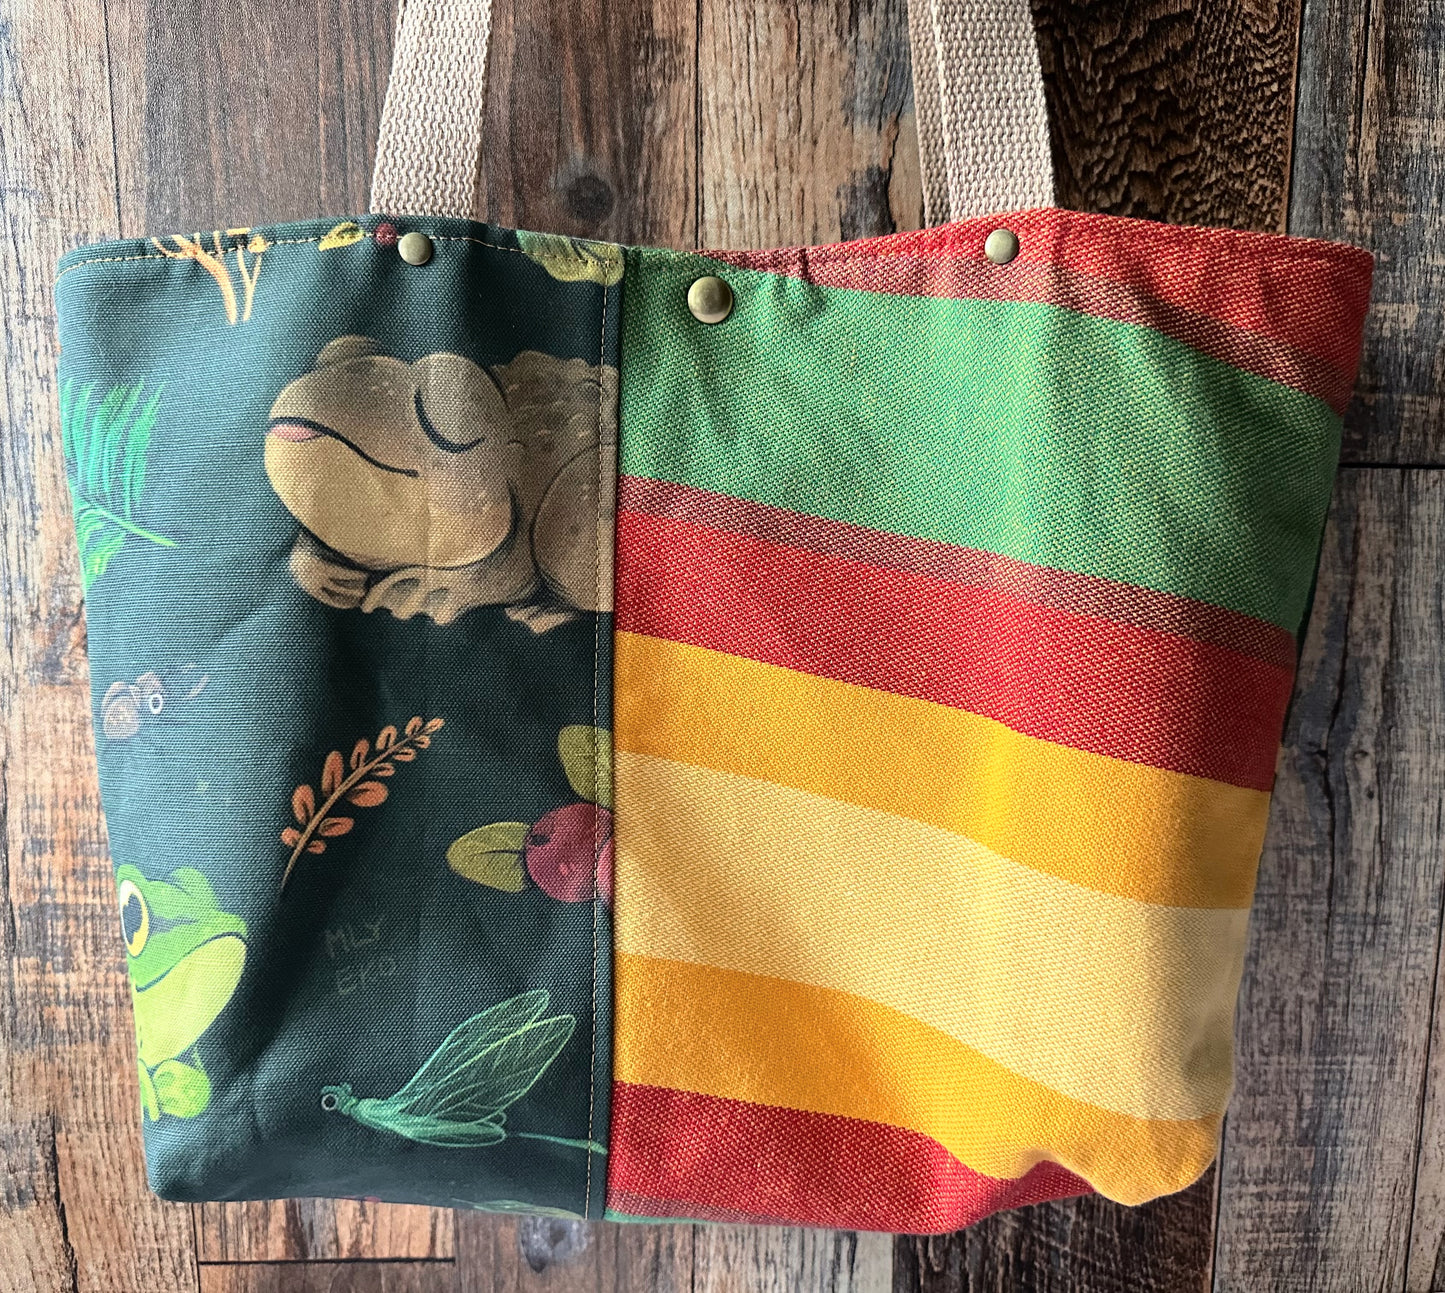 Frog and Toad Tote Bag with Zipper Pocket Divider